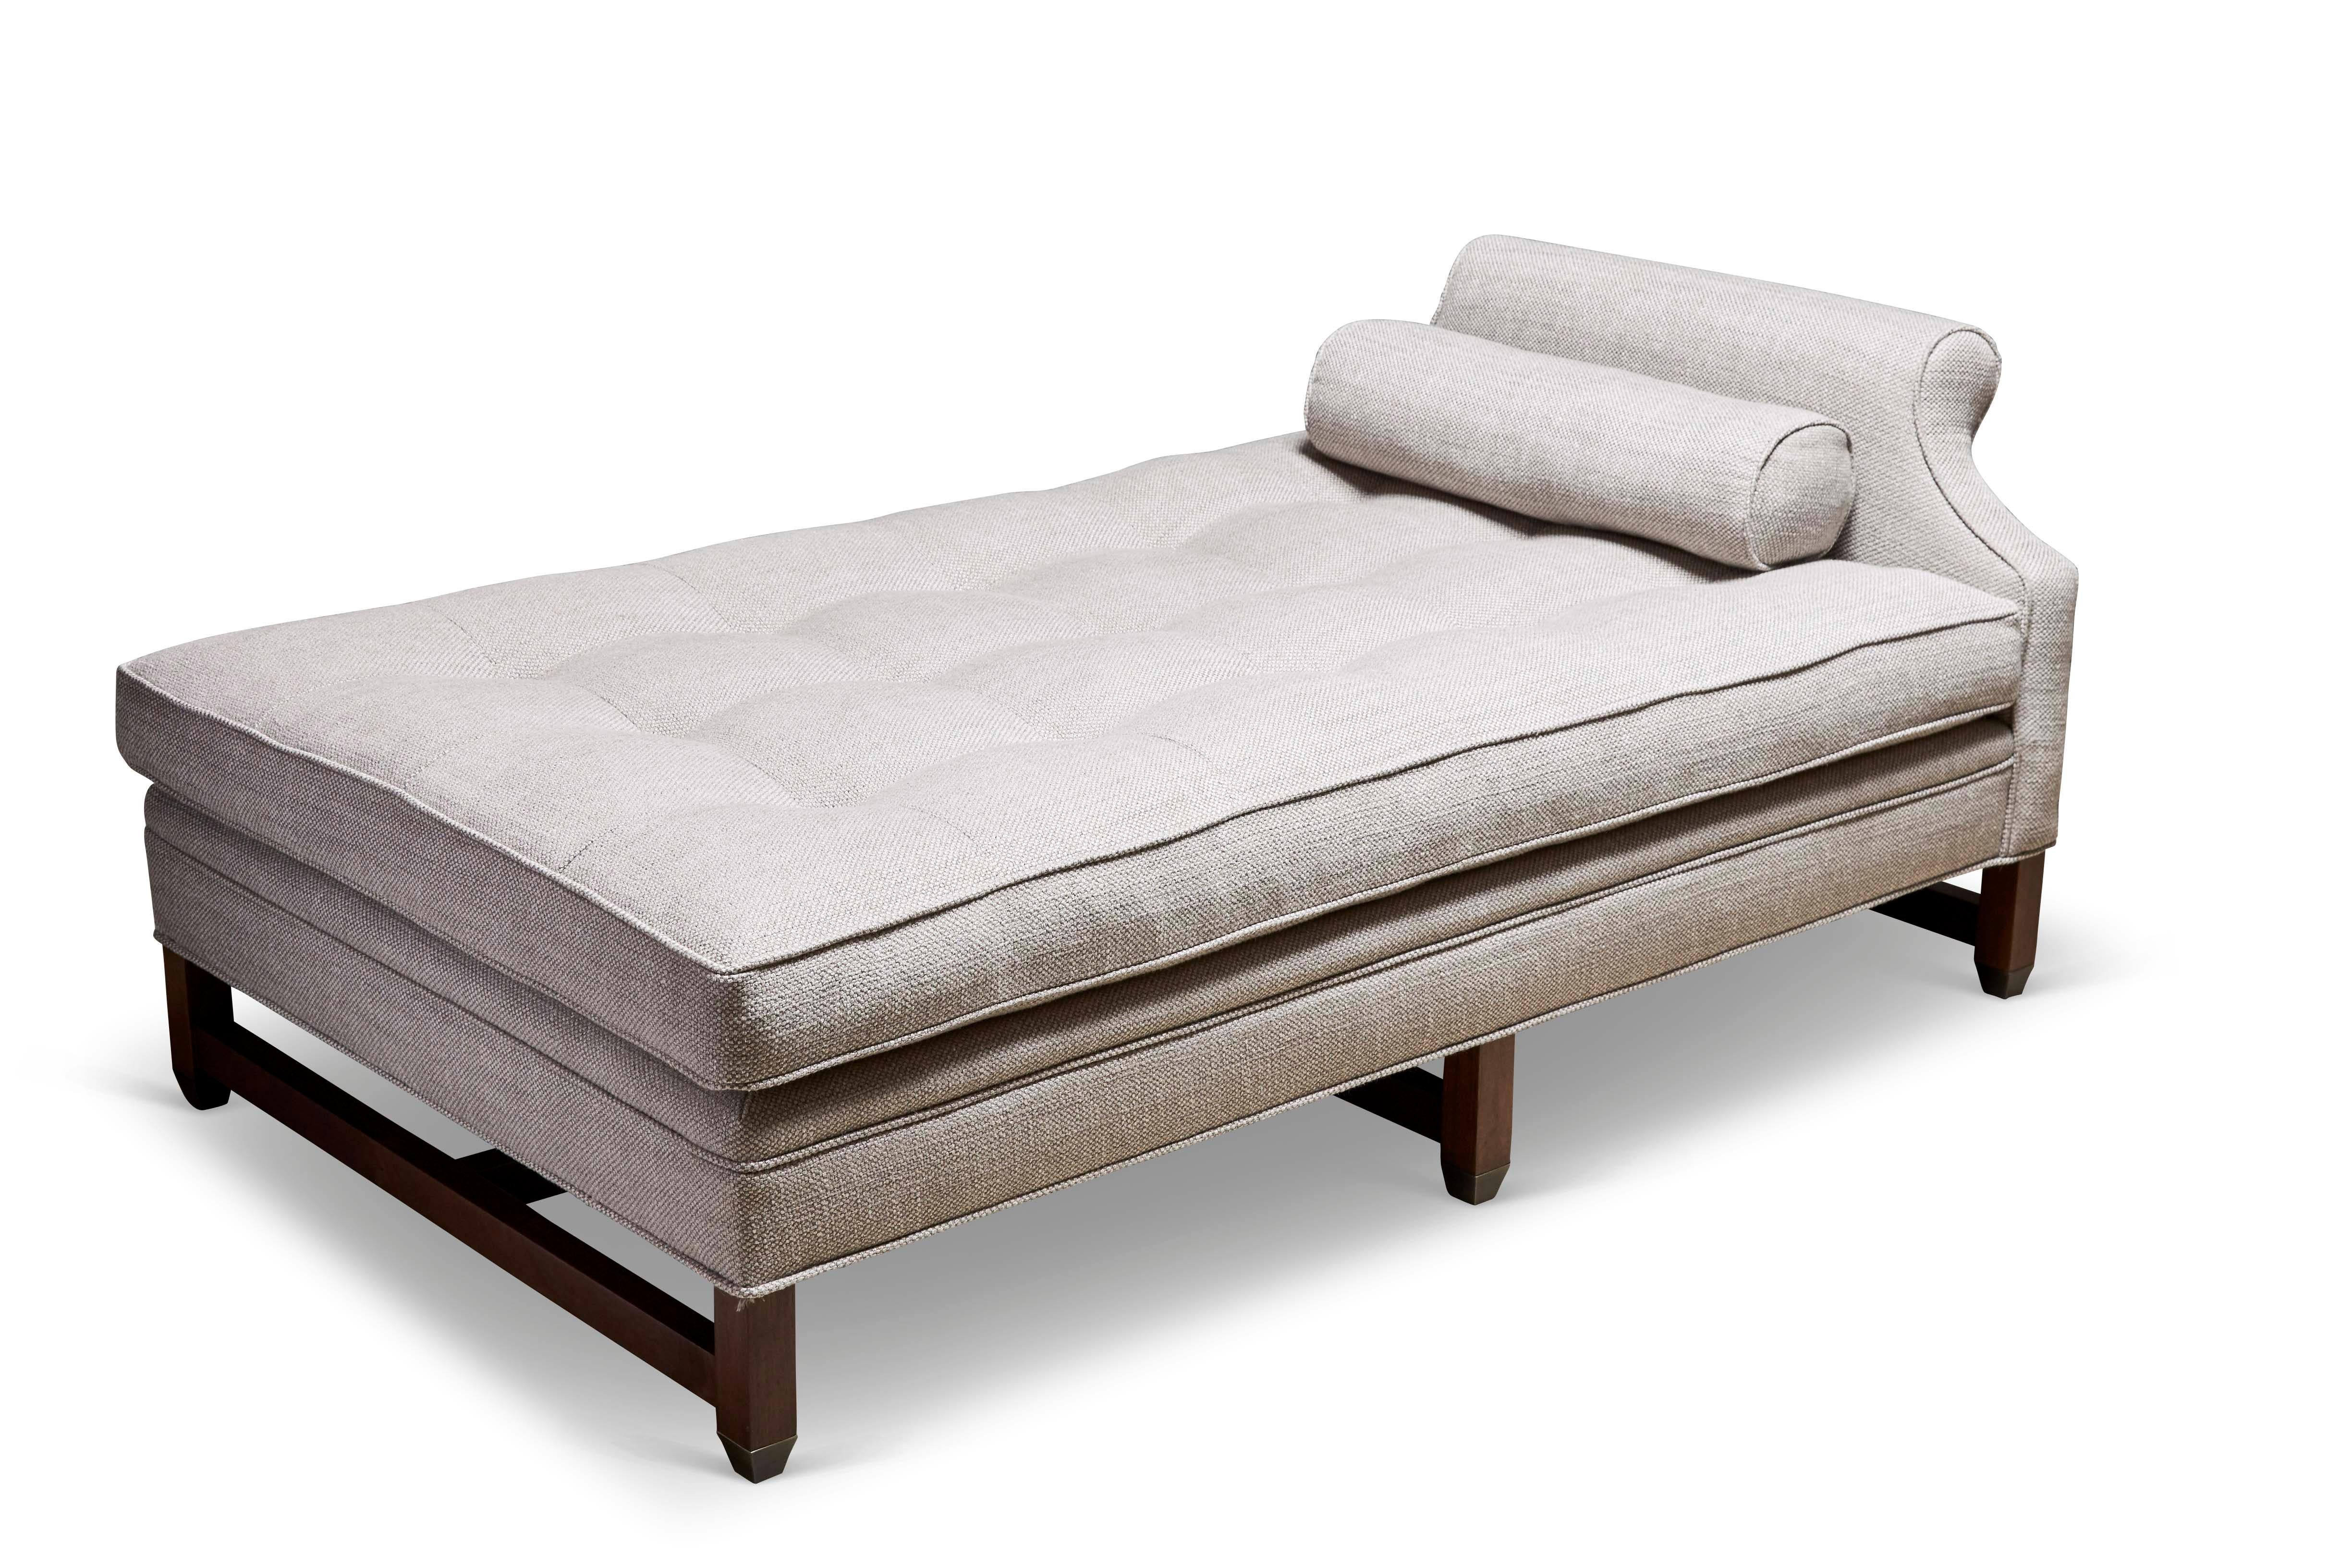 The Dutch daybed extra large has a semi-attached cushion with one bolster pillow. The base is made of American walnut or white oak and antique brass toecaps. 

The Lawson-Fenning Collection is designed and handmade in Los Angeles, California. Reach